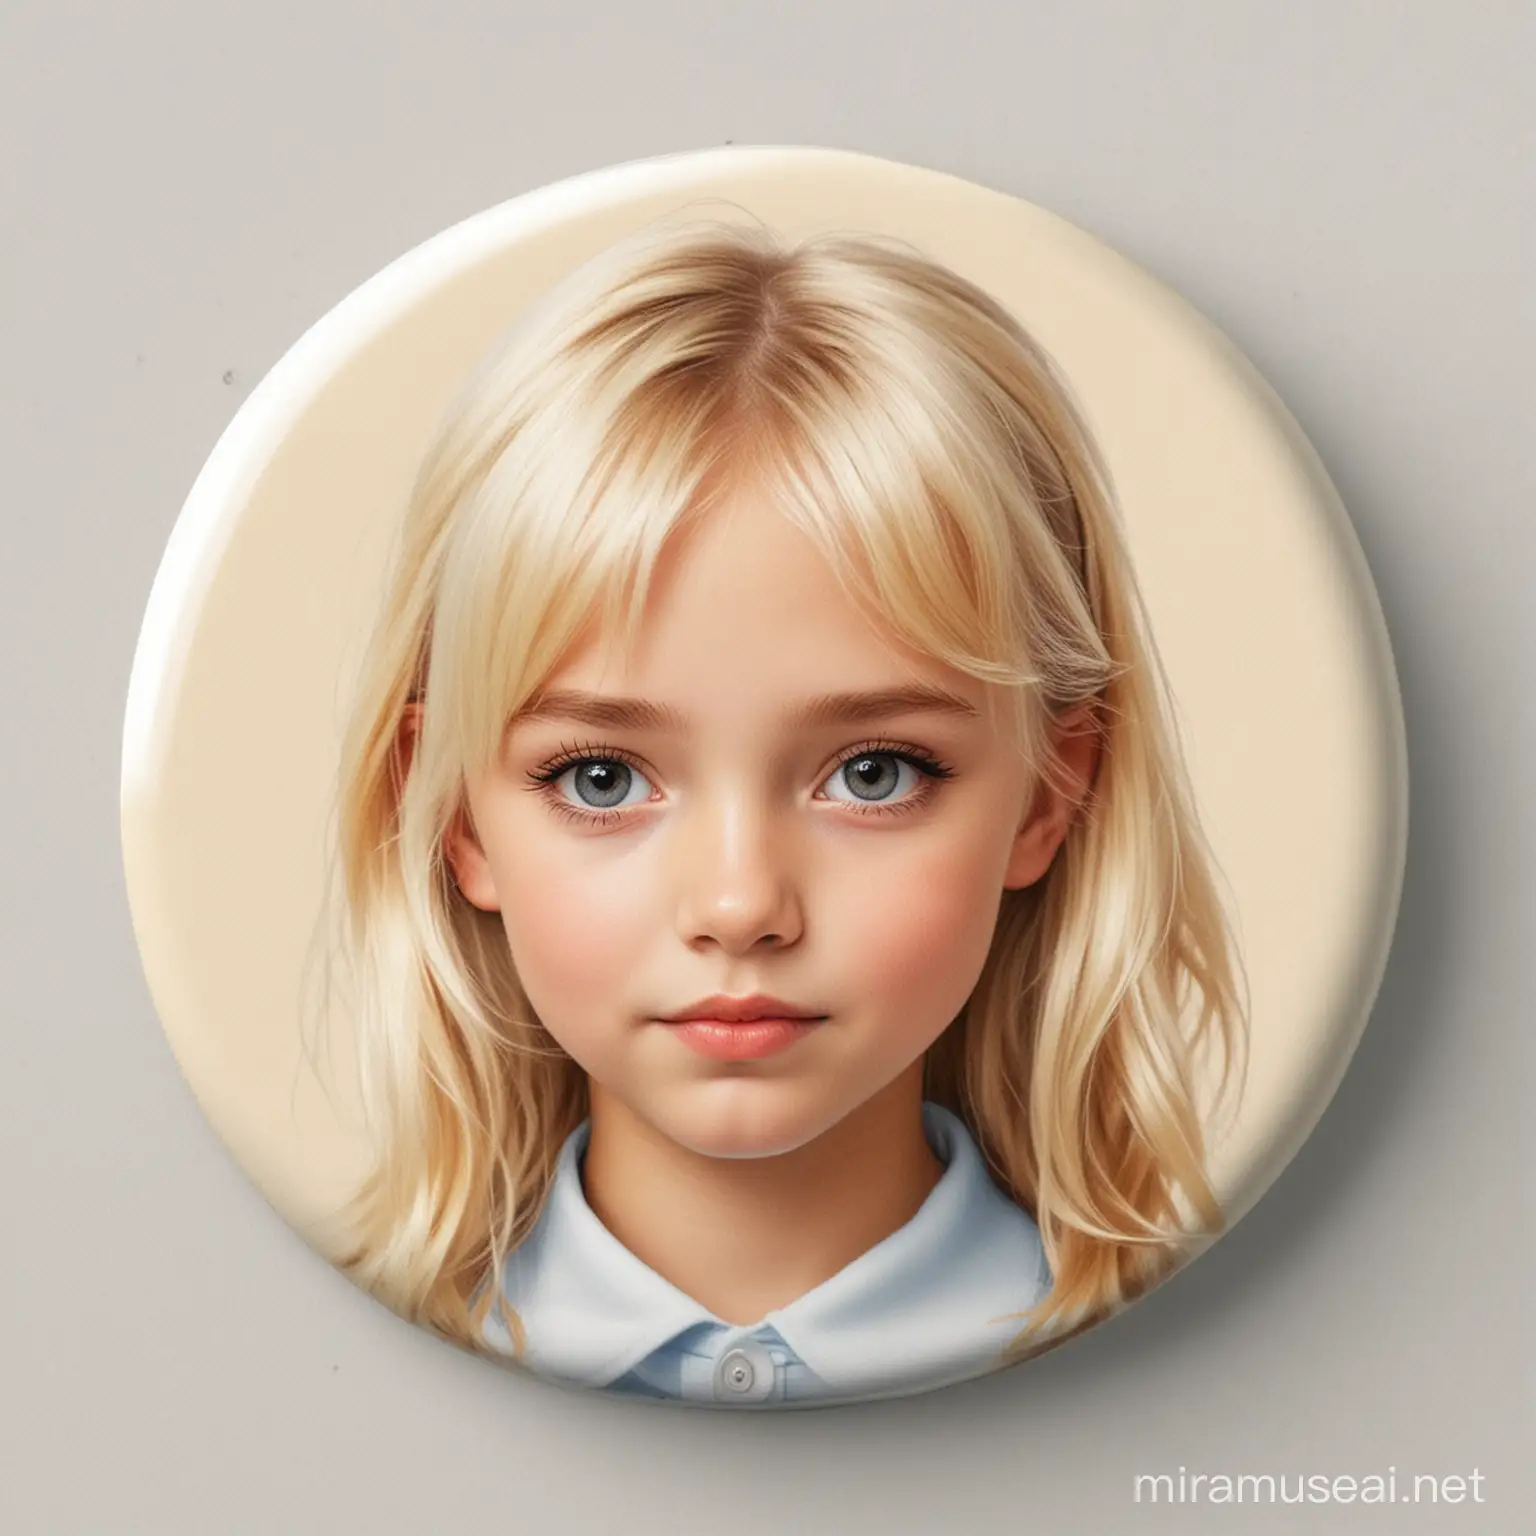 A circular badge with the head of a young girl on it Blonde and beautiful
